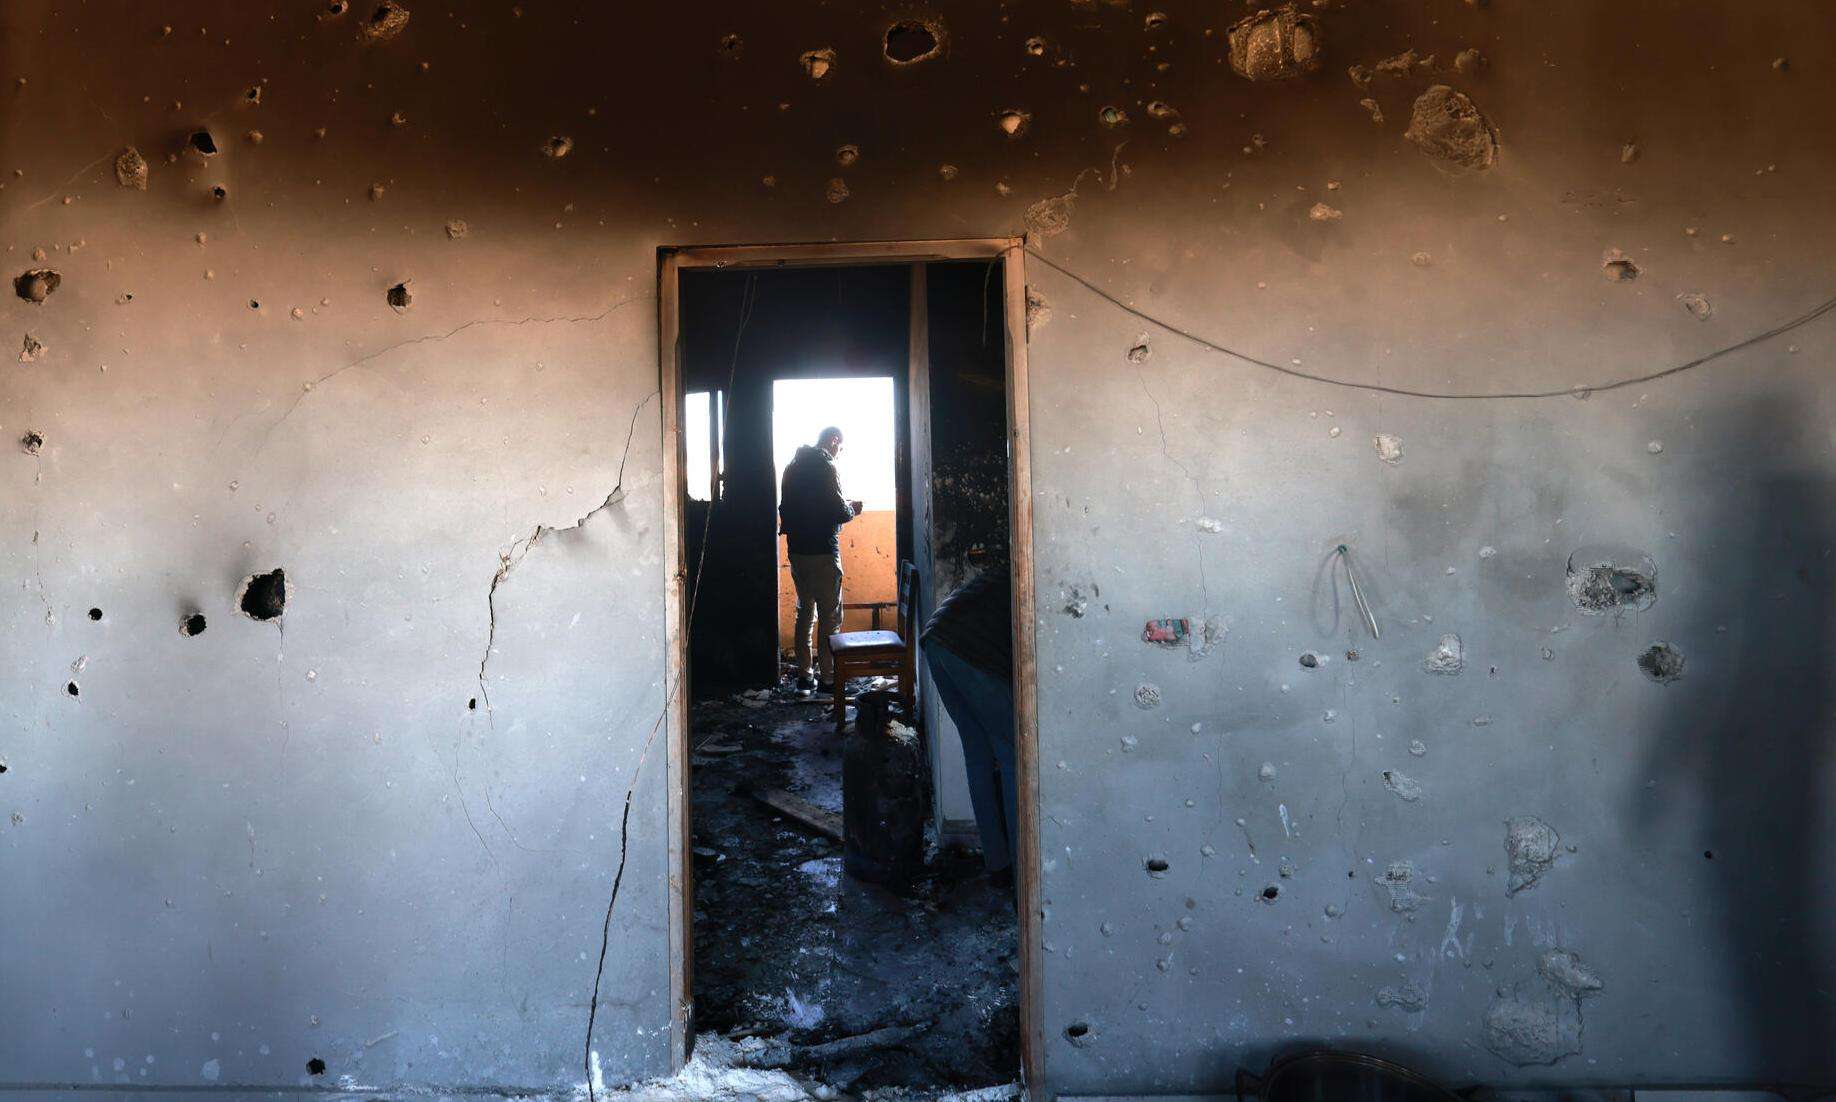 Damaged interior of MSF's shelter in Al-Mawasi in Khan Younis, Gaza, after an Israeli attack.